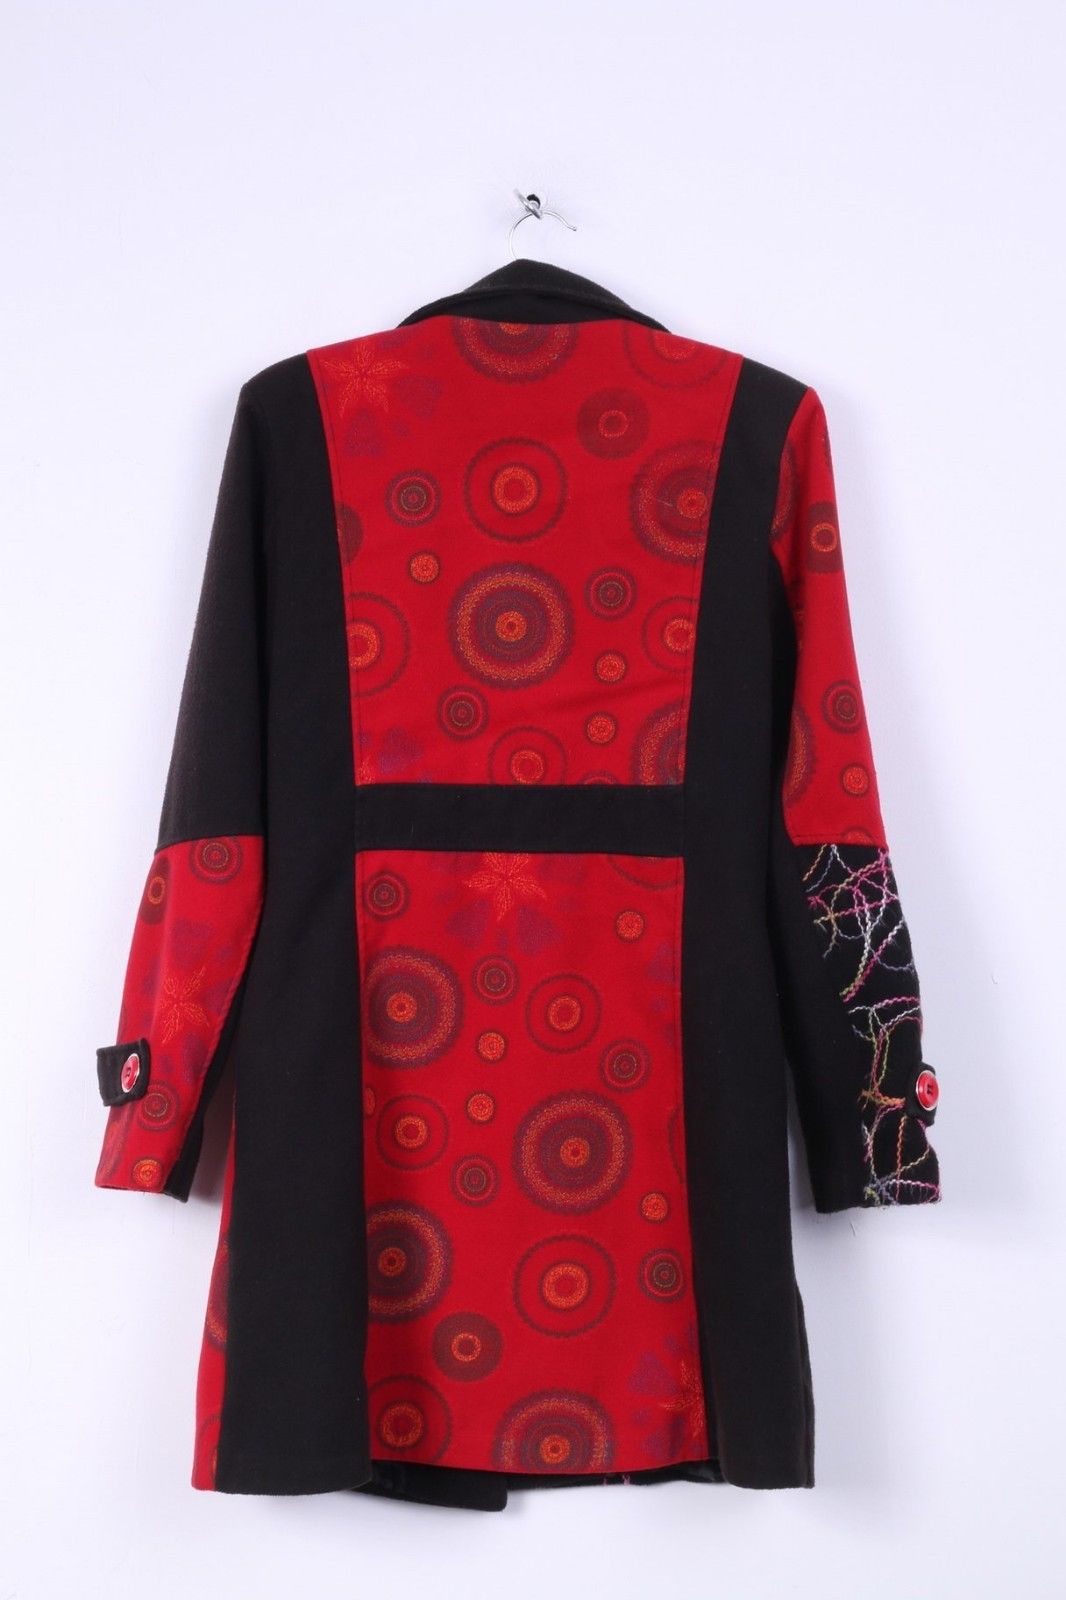 Women's S Coat Black Red Embroidered Big Buttons Fitted Spring Top